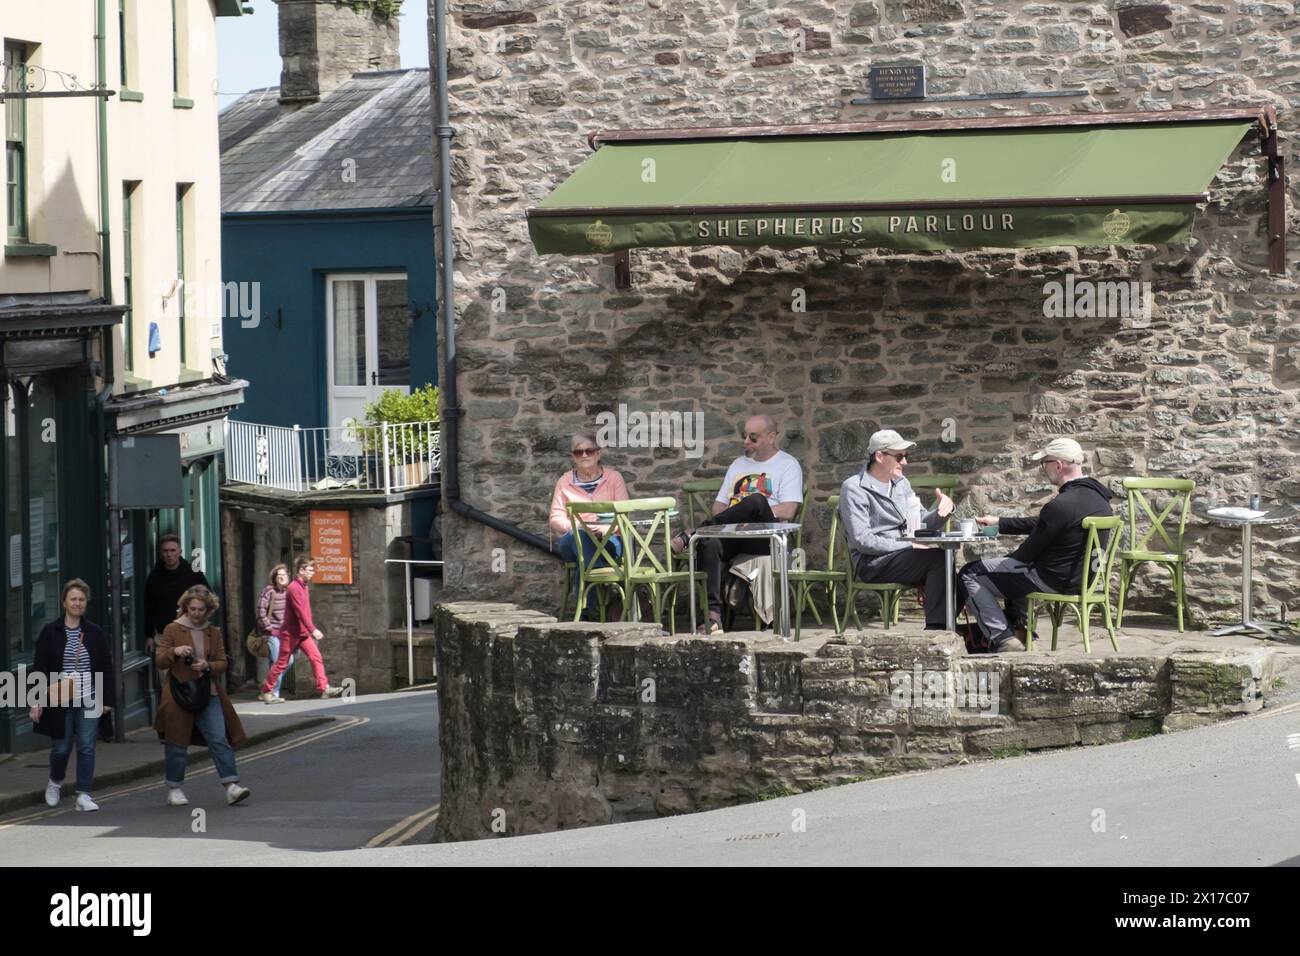 Hay-on-Wye a town of books in Powys Wales UK Al Fresco dining at the Sheperds Parlour Cafe Stock Photo